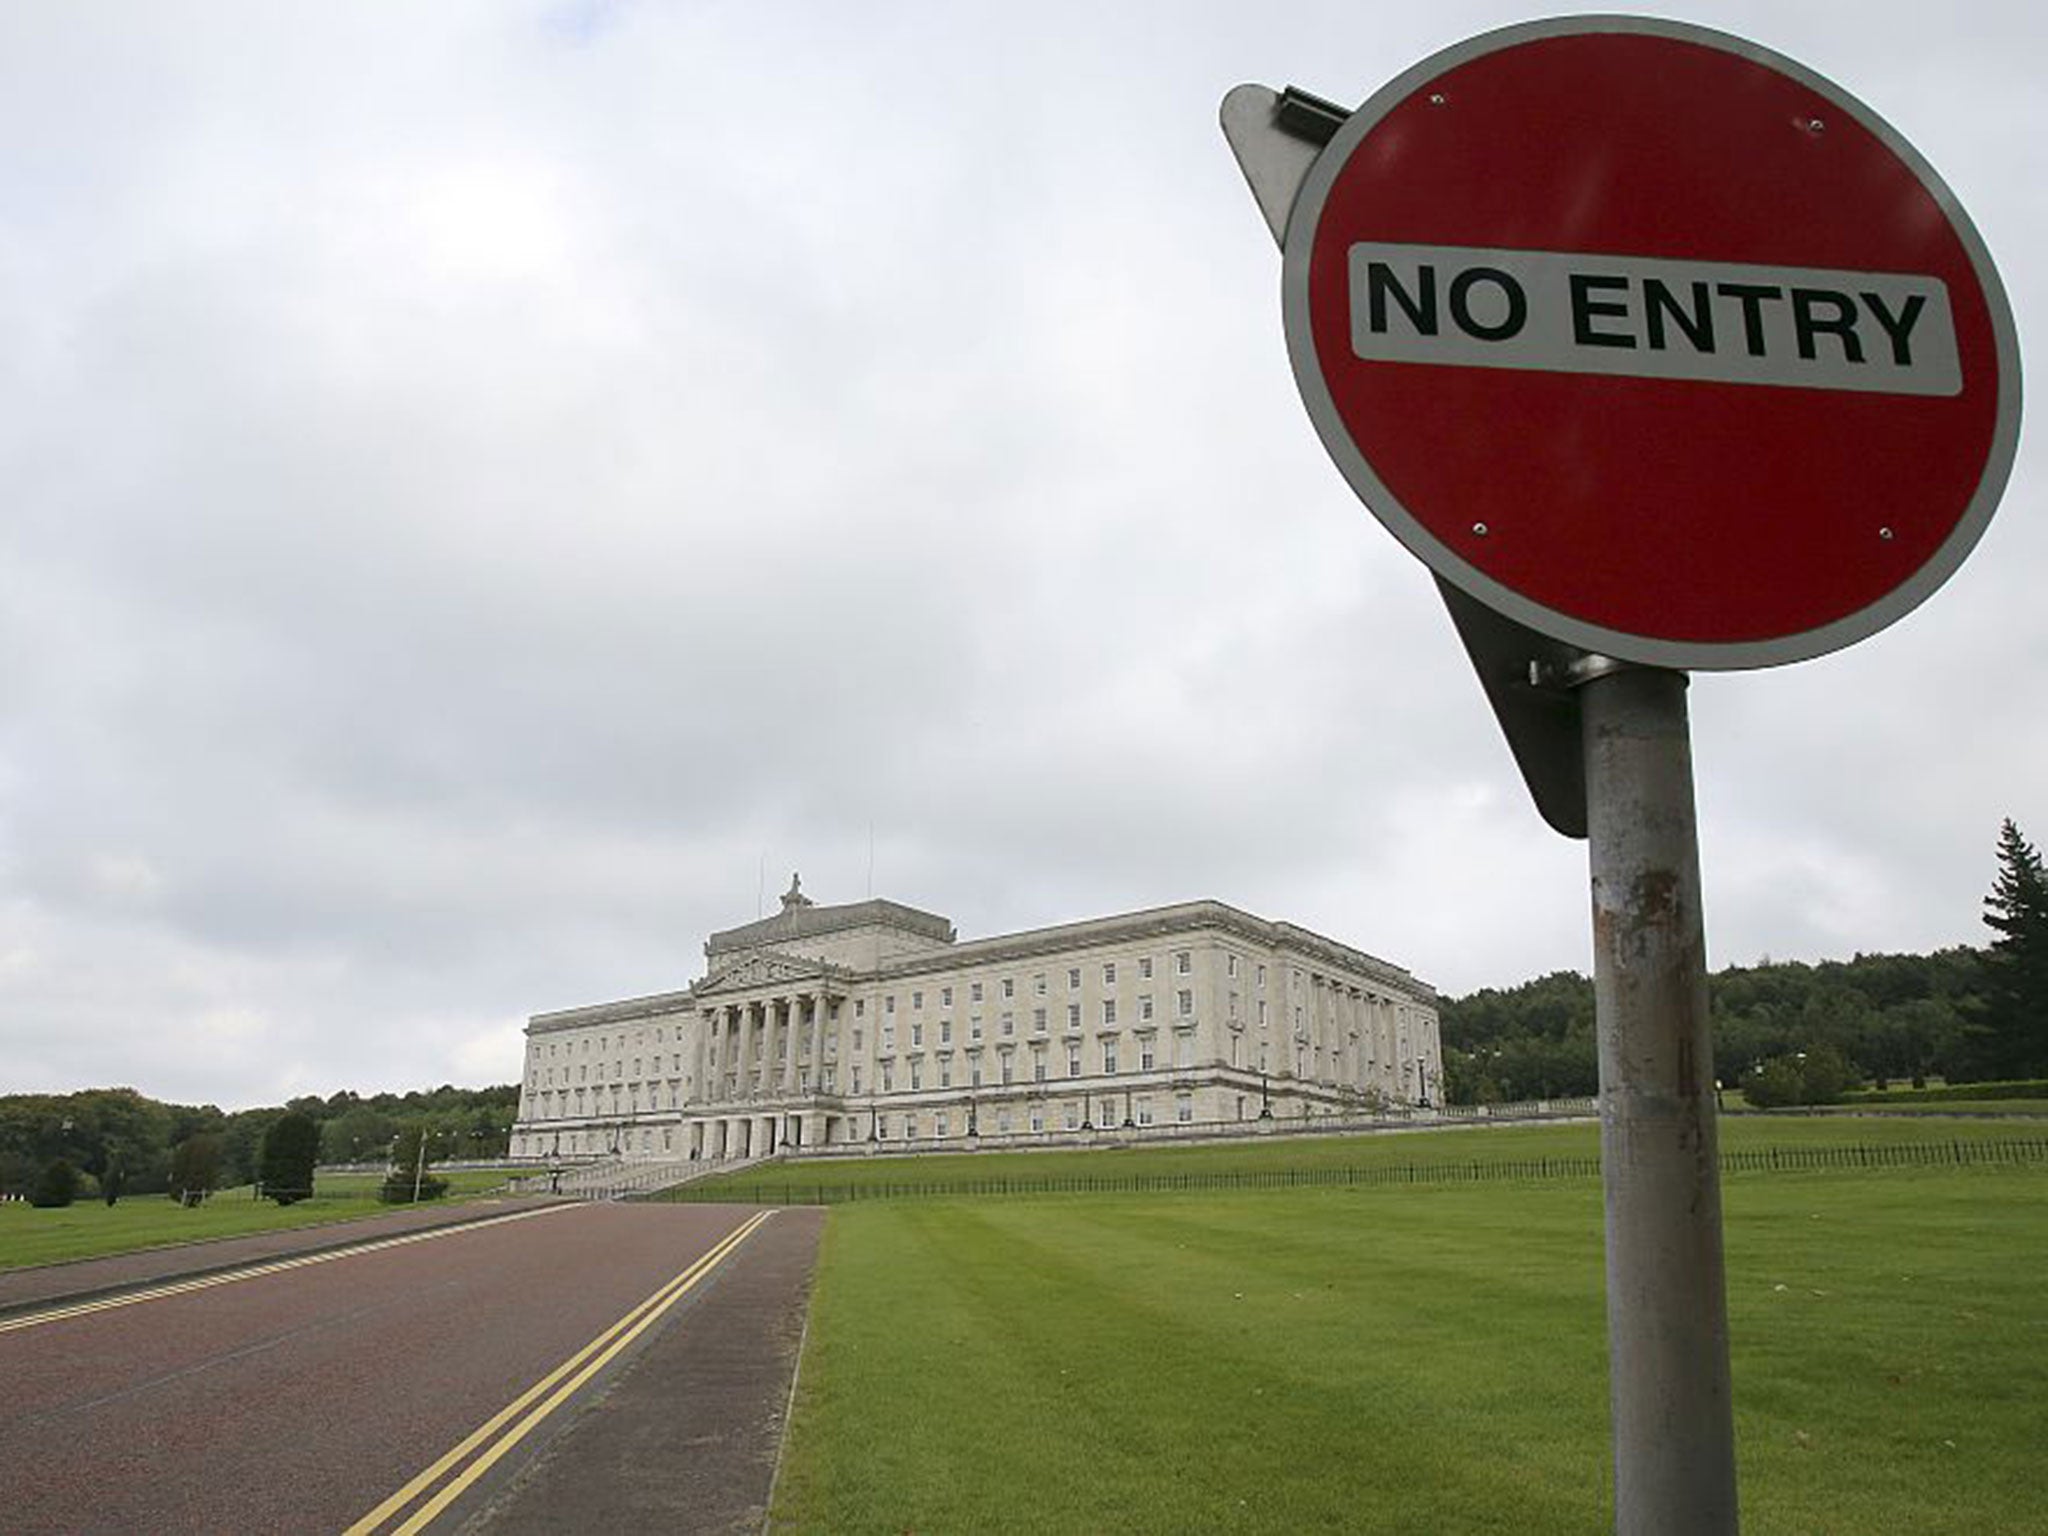 Power sharing has now been suspended at Stormont in Belfast since January 2017